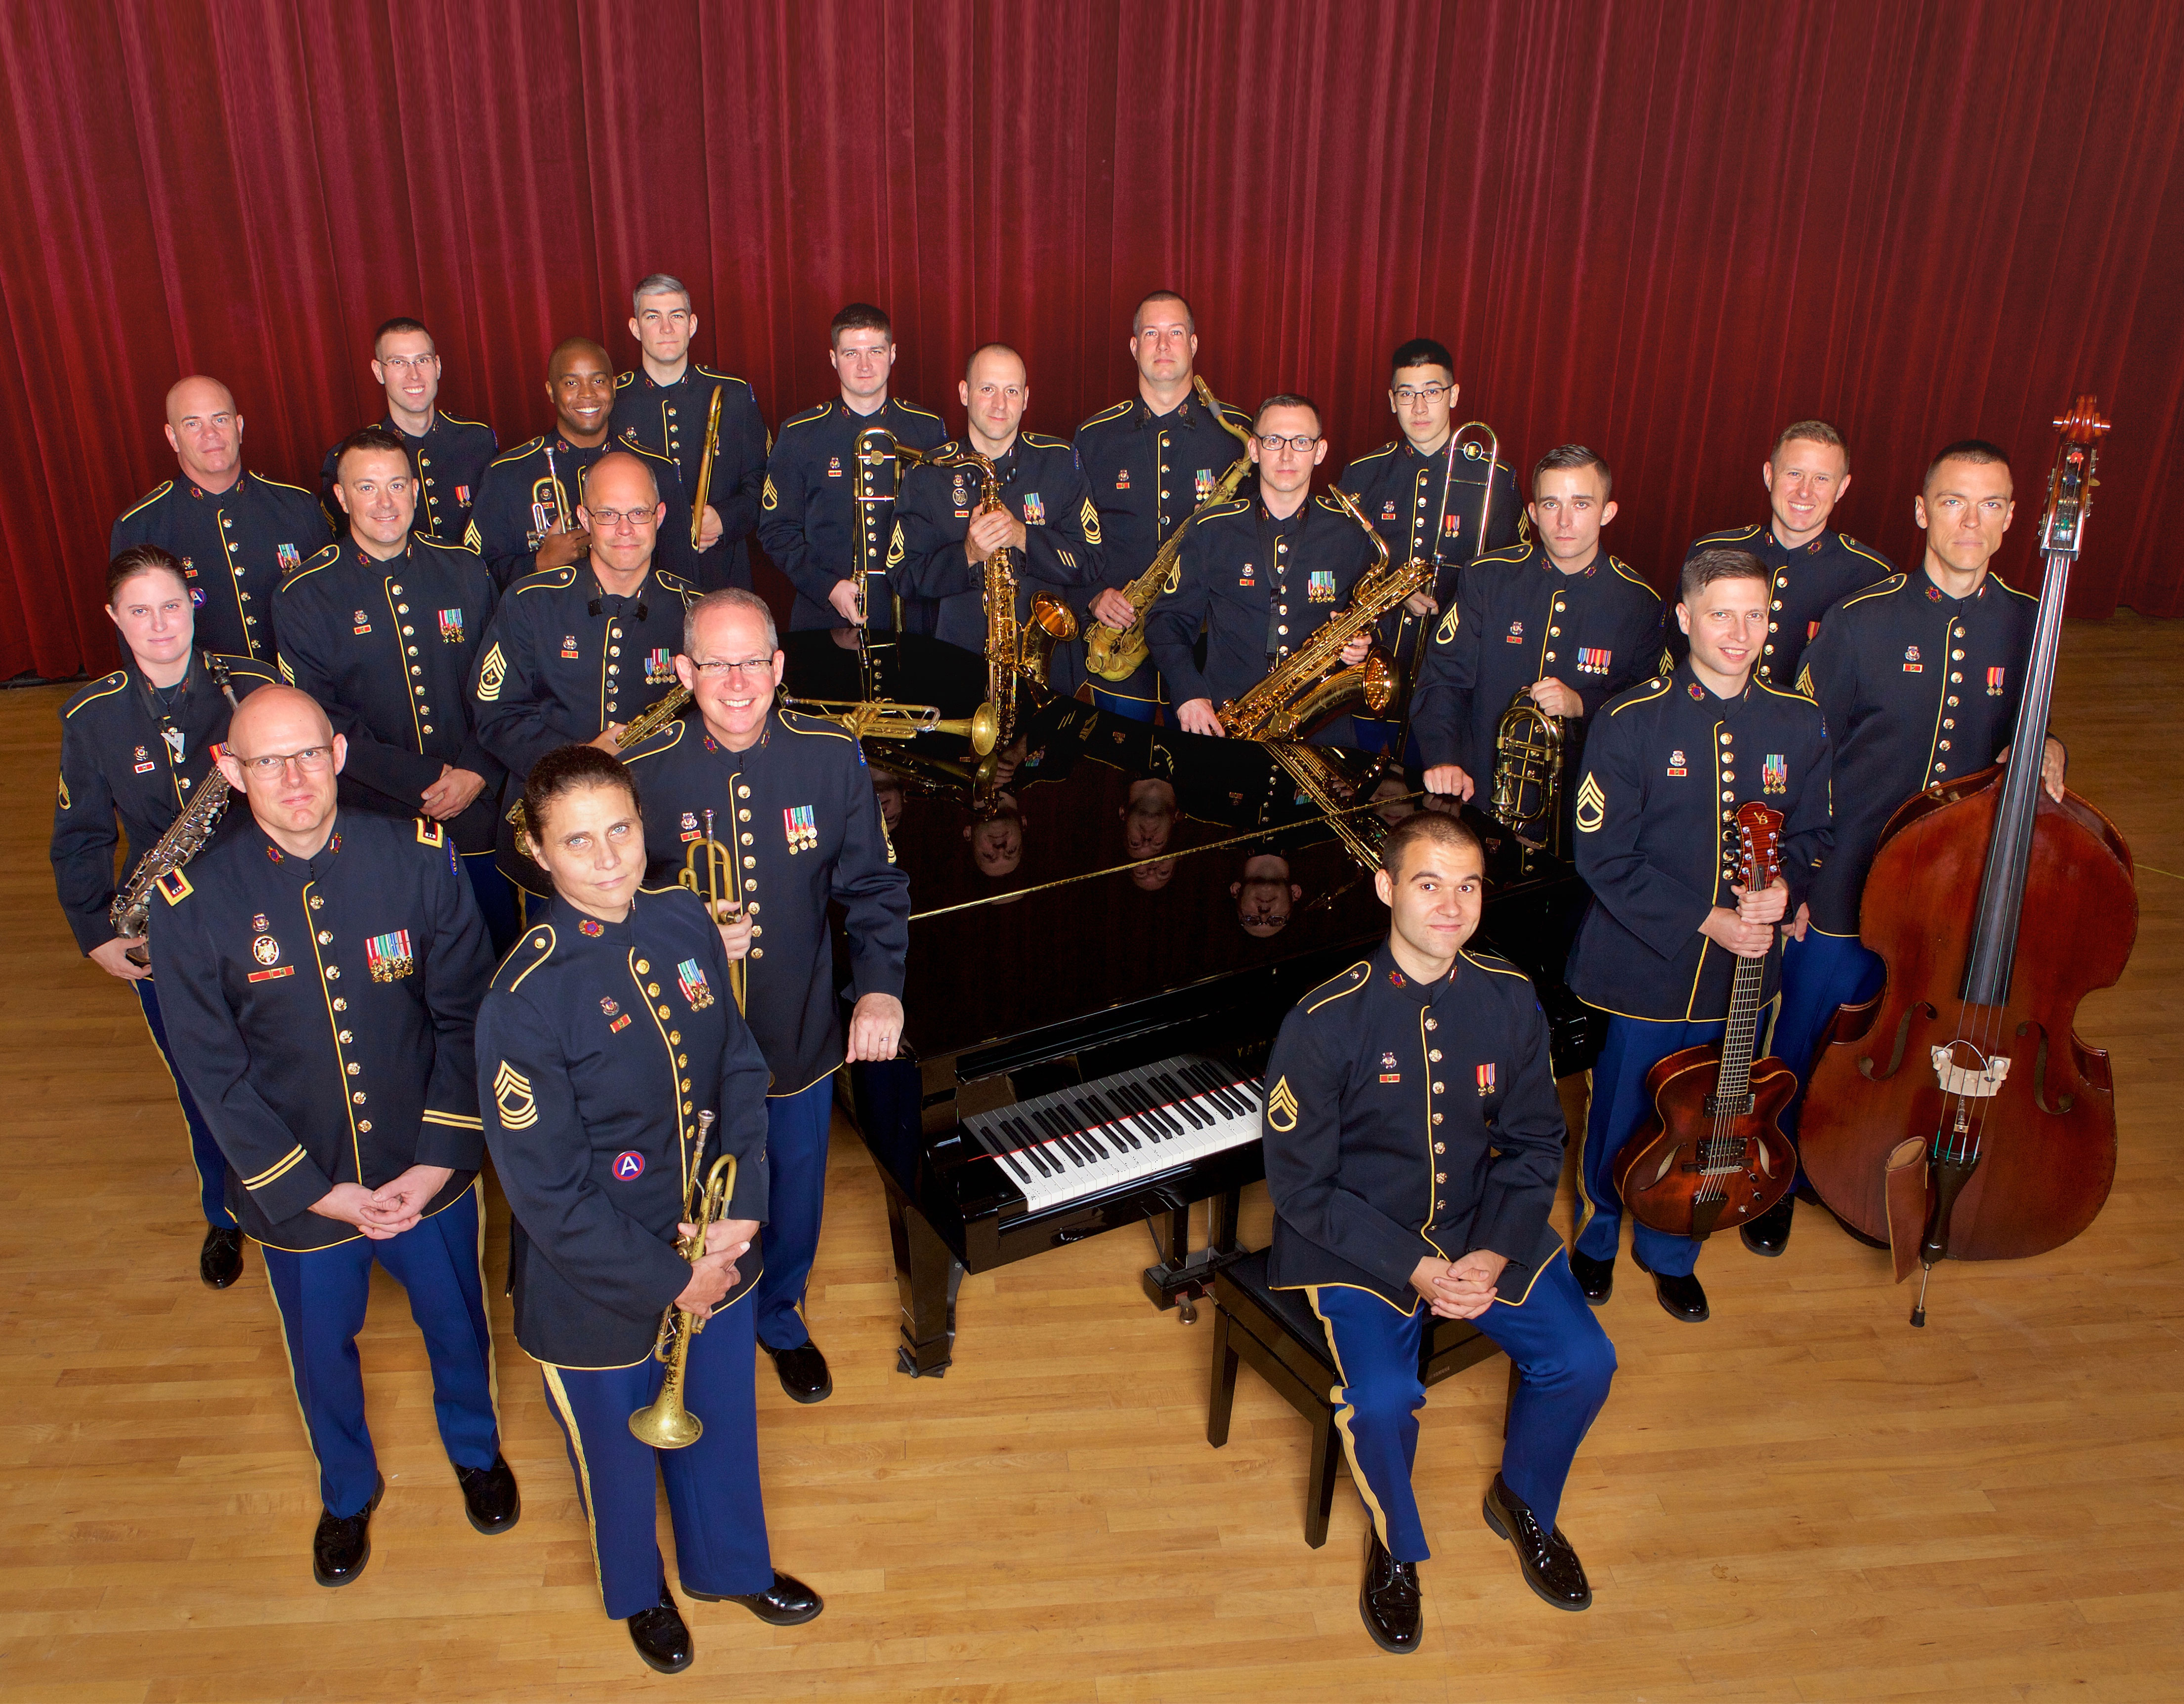 Colored photo Jazz members in full uniform standing around piano holding jazz instruments